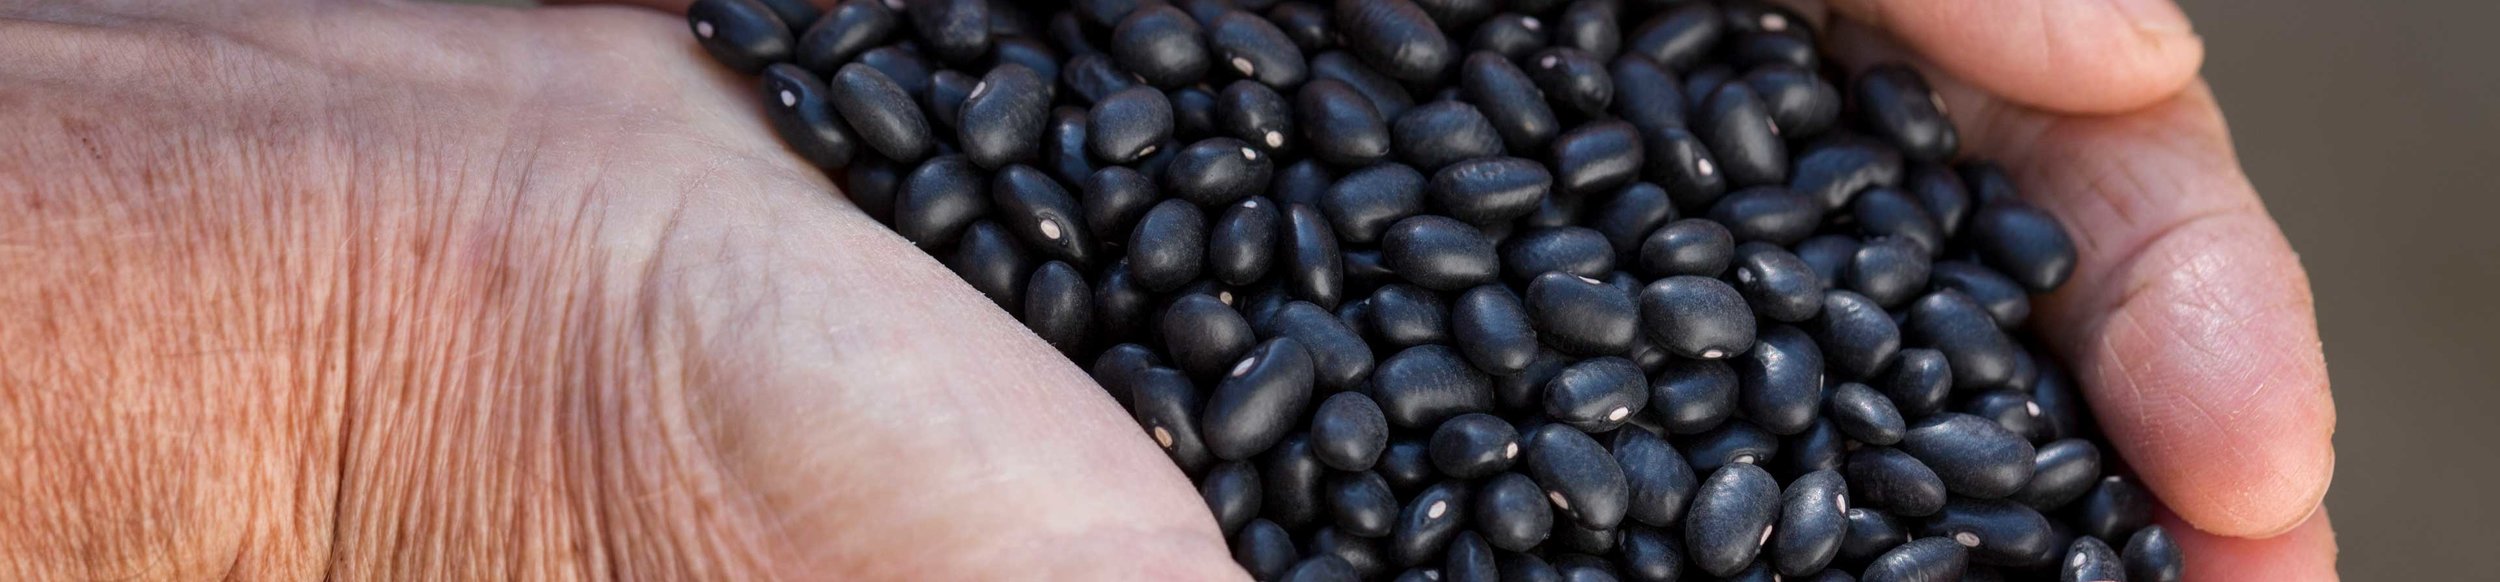 For several years now, Cono has focused on growing and processing black beans.